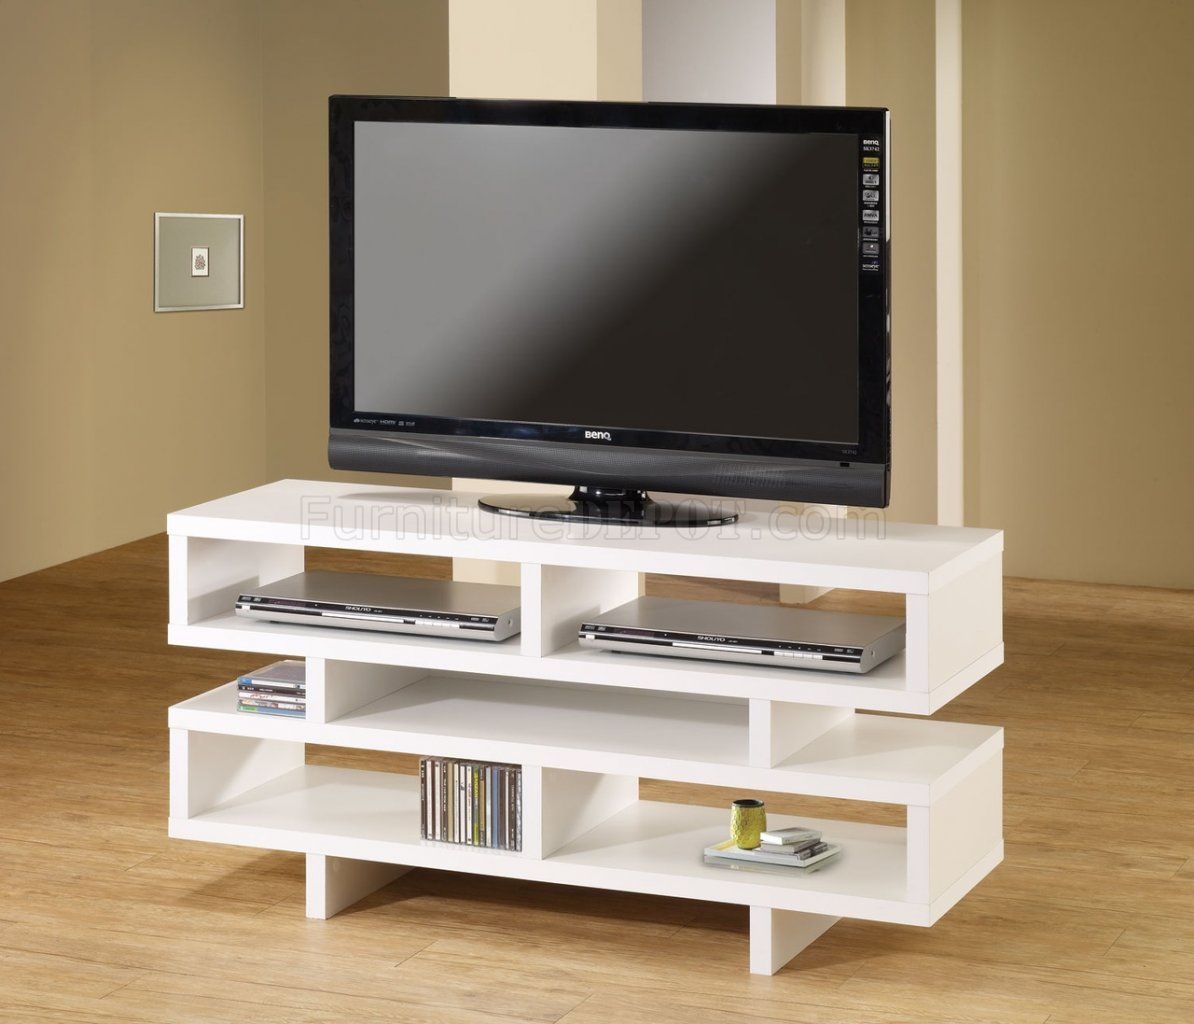 700721 Tv Stand In Whitecoaster Intended For Simple Open Storage Shelf Corner Tv Stands (View 5 of 15)